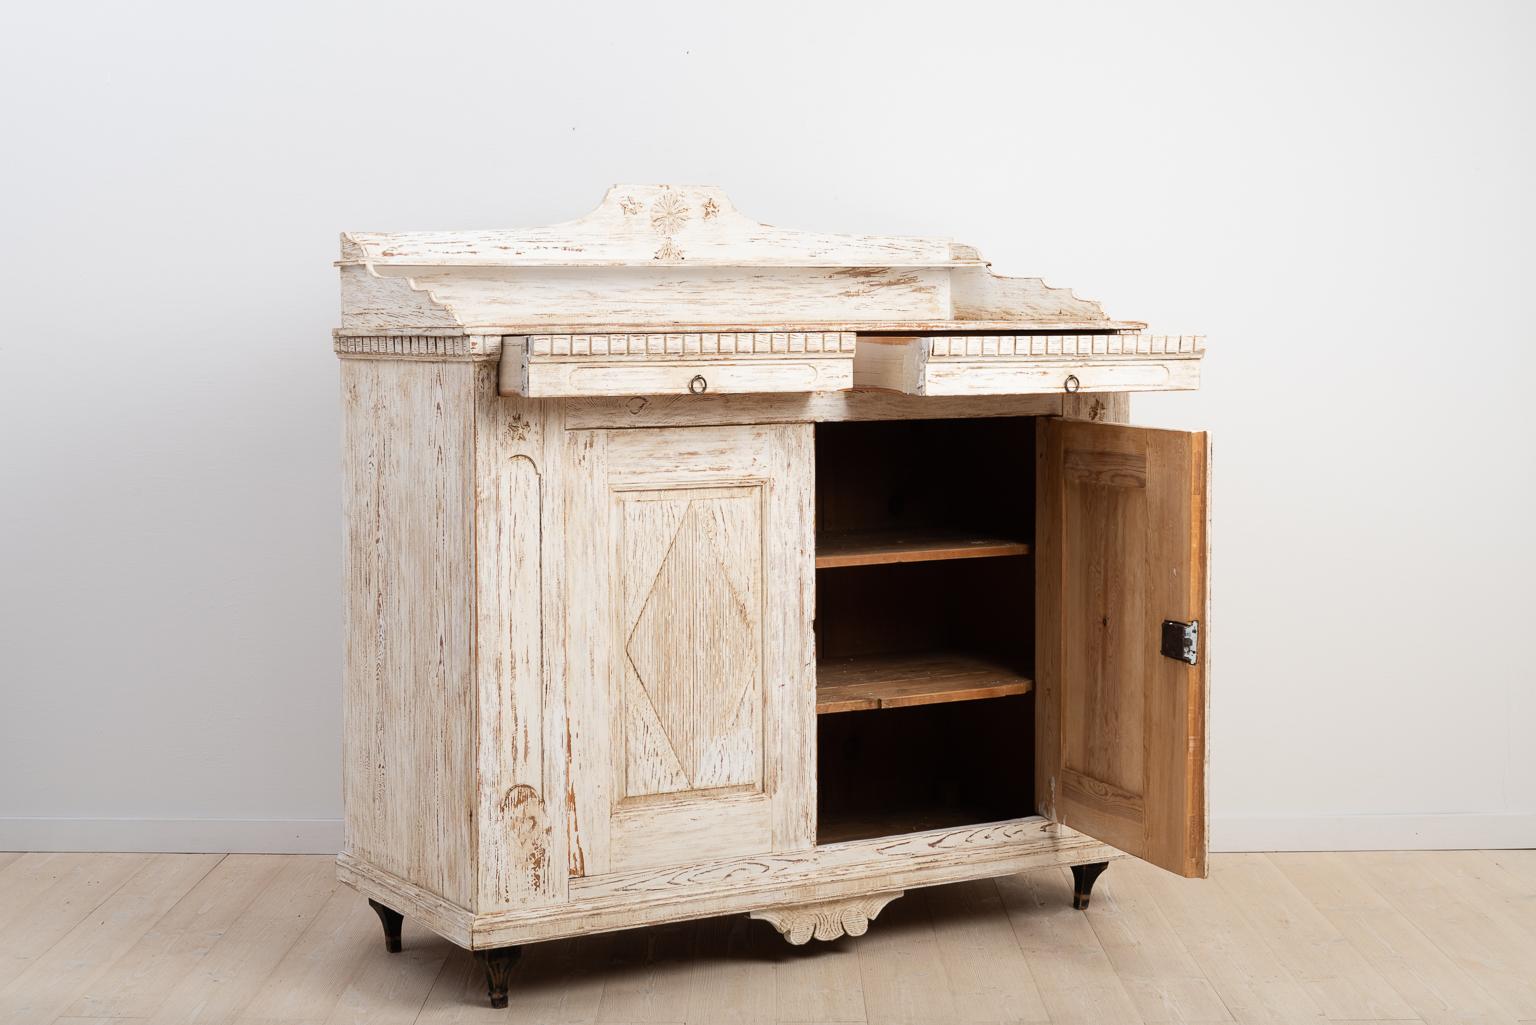 Pine Swedish Gustavian Sideboard from the Late 18th Century with Old Historic Paint